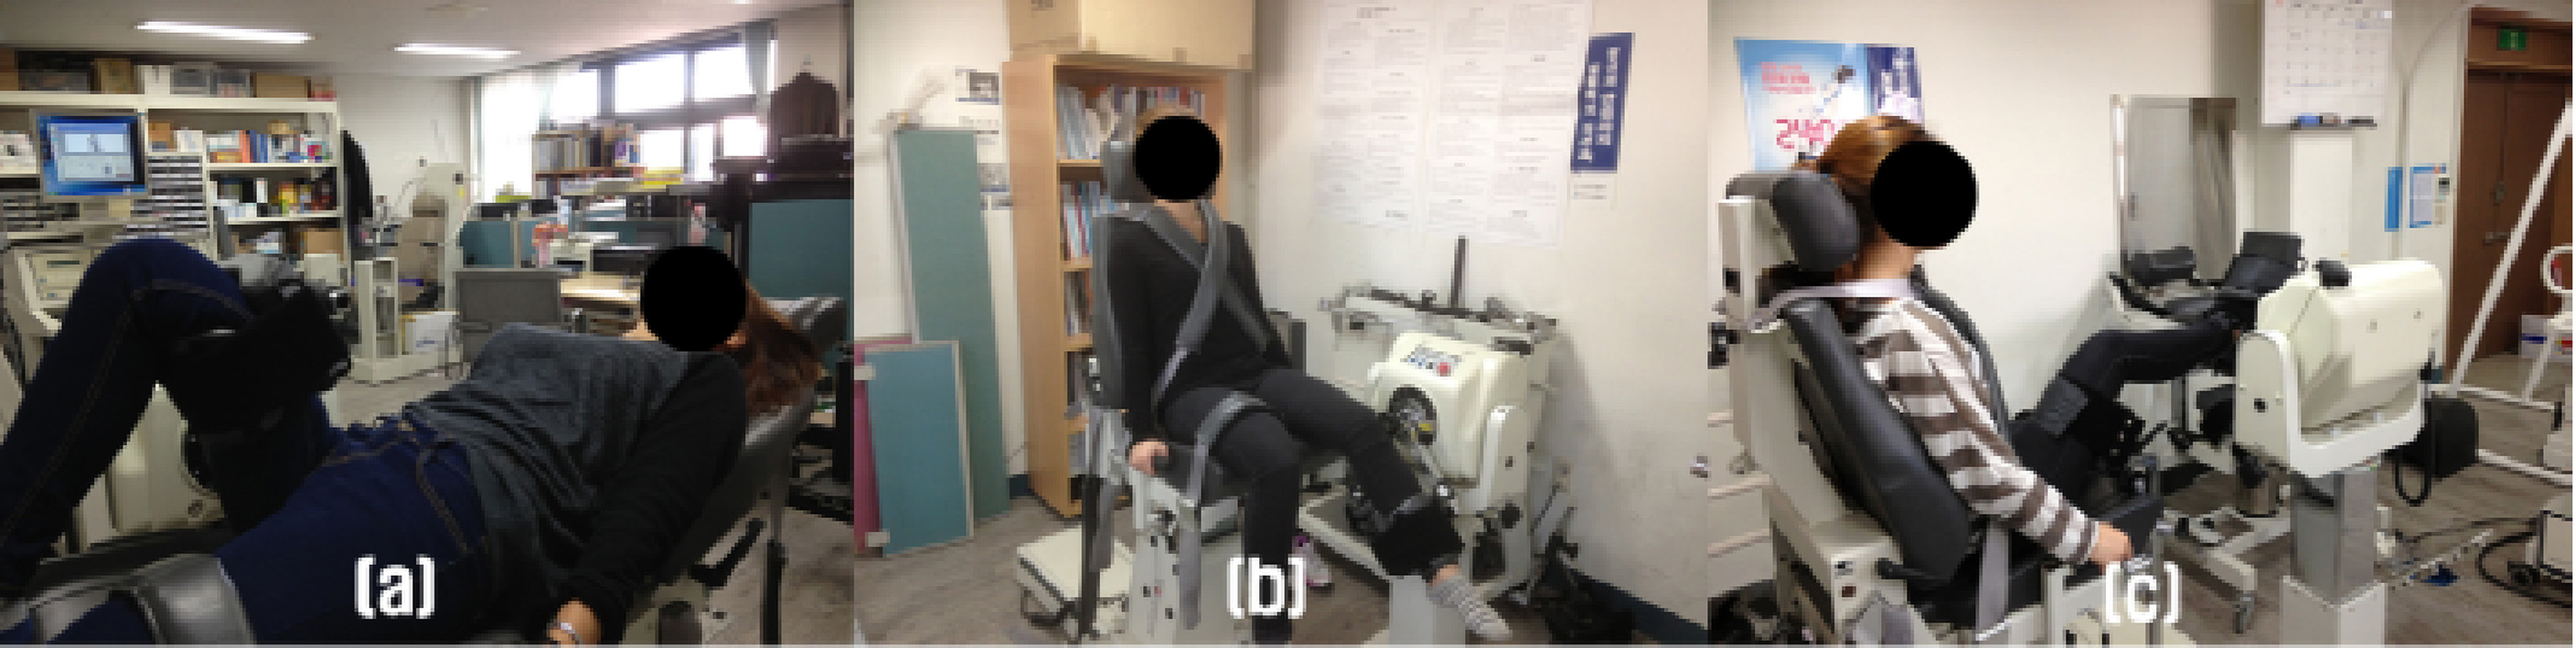 Estimation of isokinetic muscle function to compare imbalance improvement ratios: (a) hip, (b) knee, (c) ankle.